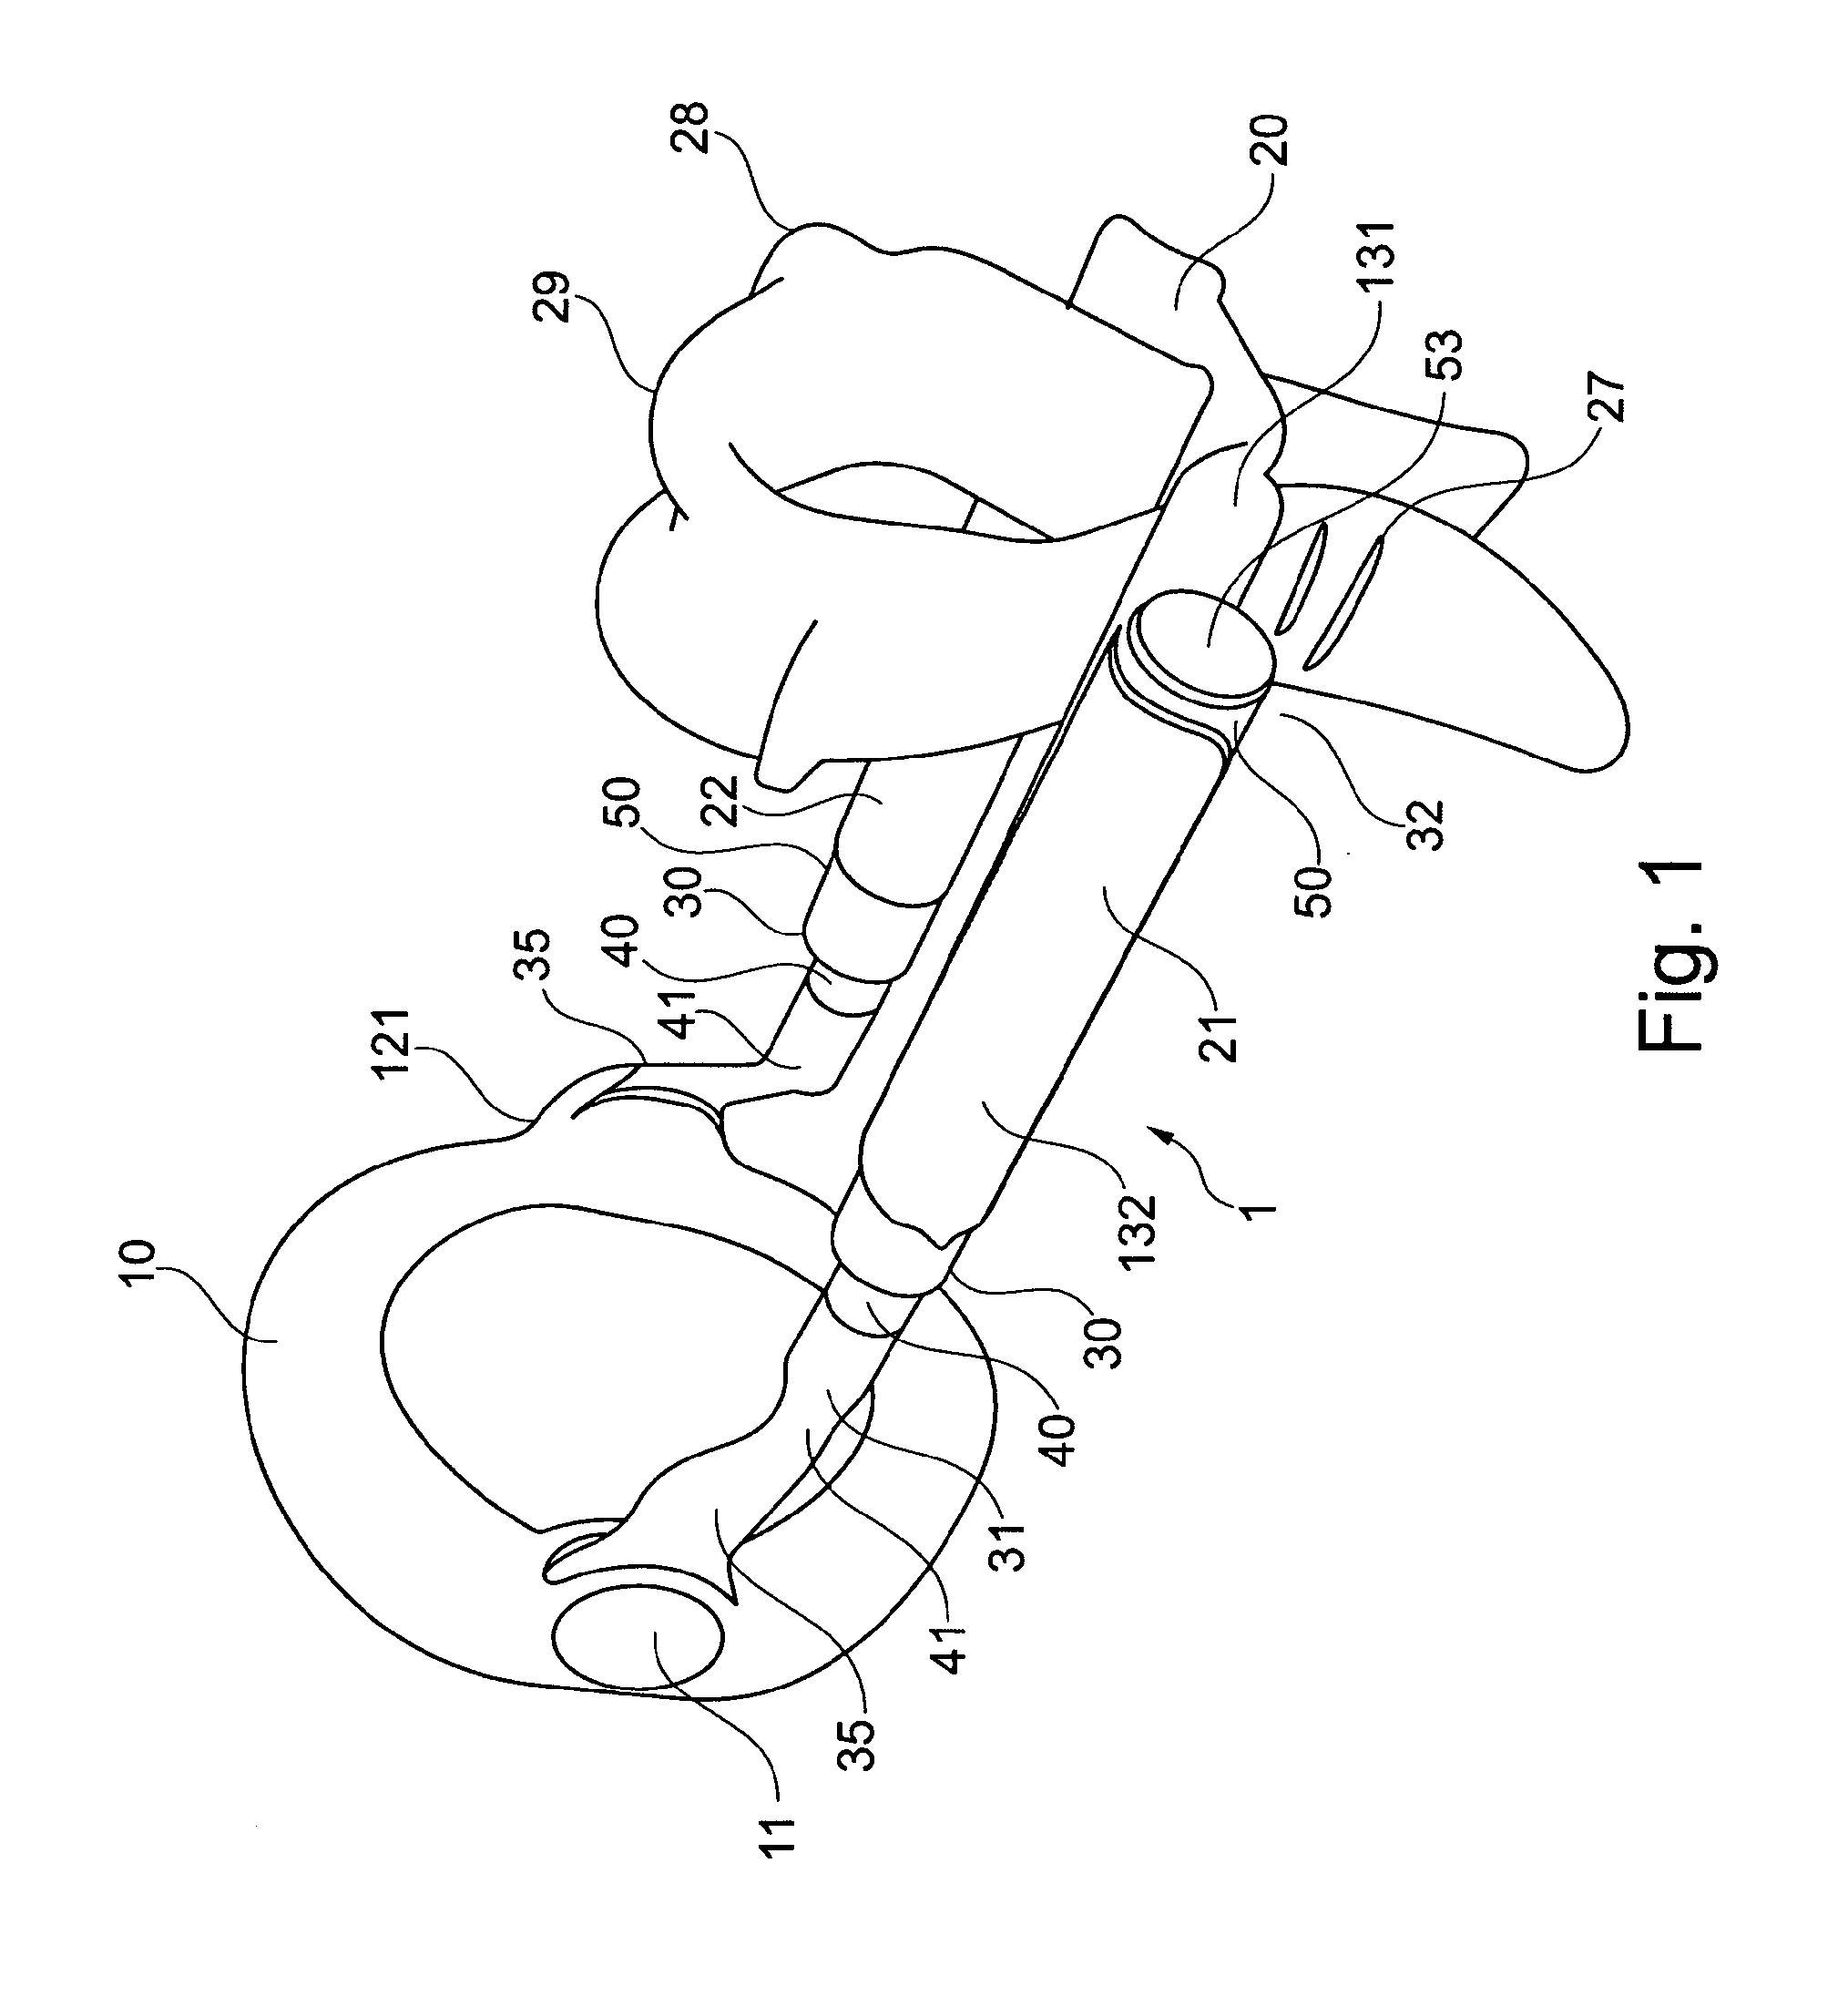 Apparatus for applying traction to a penis